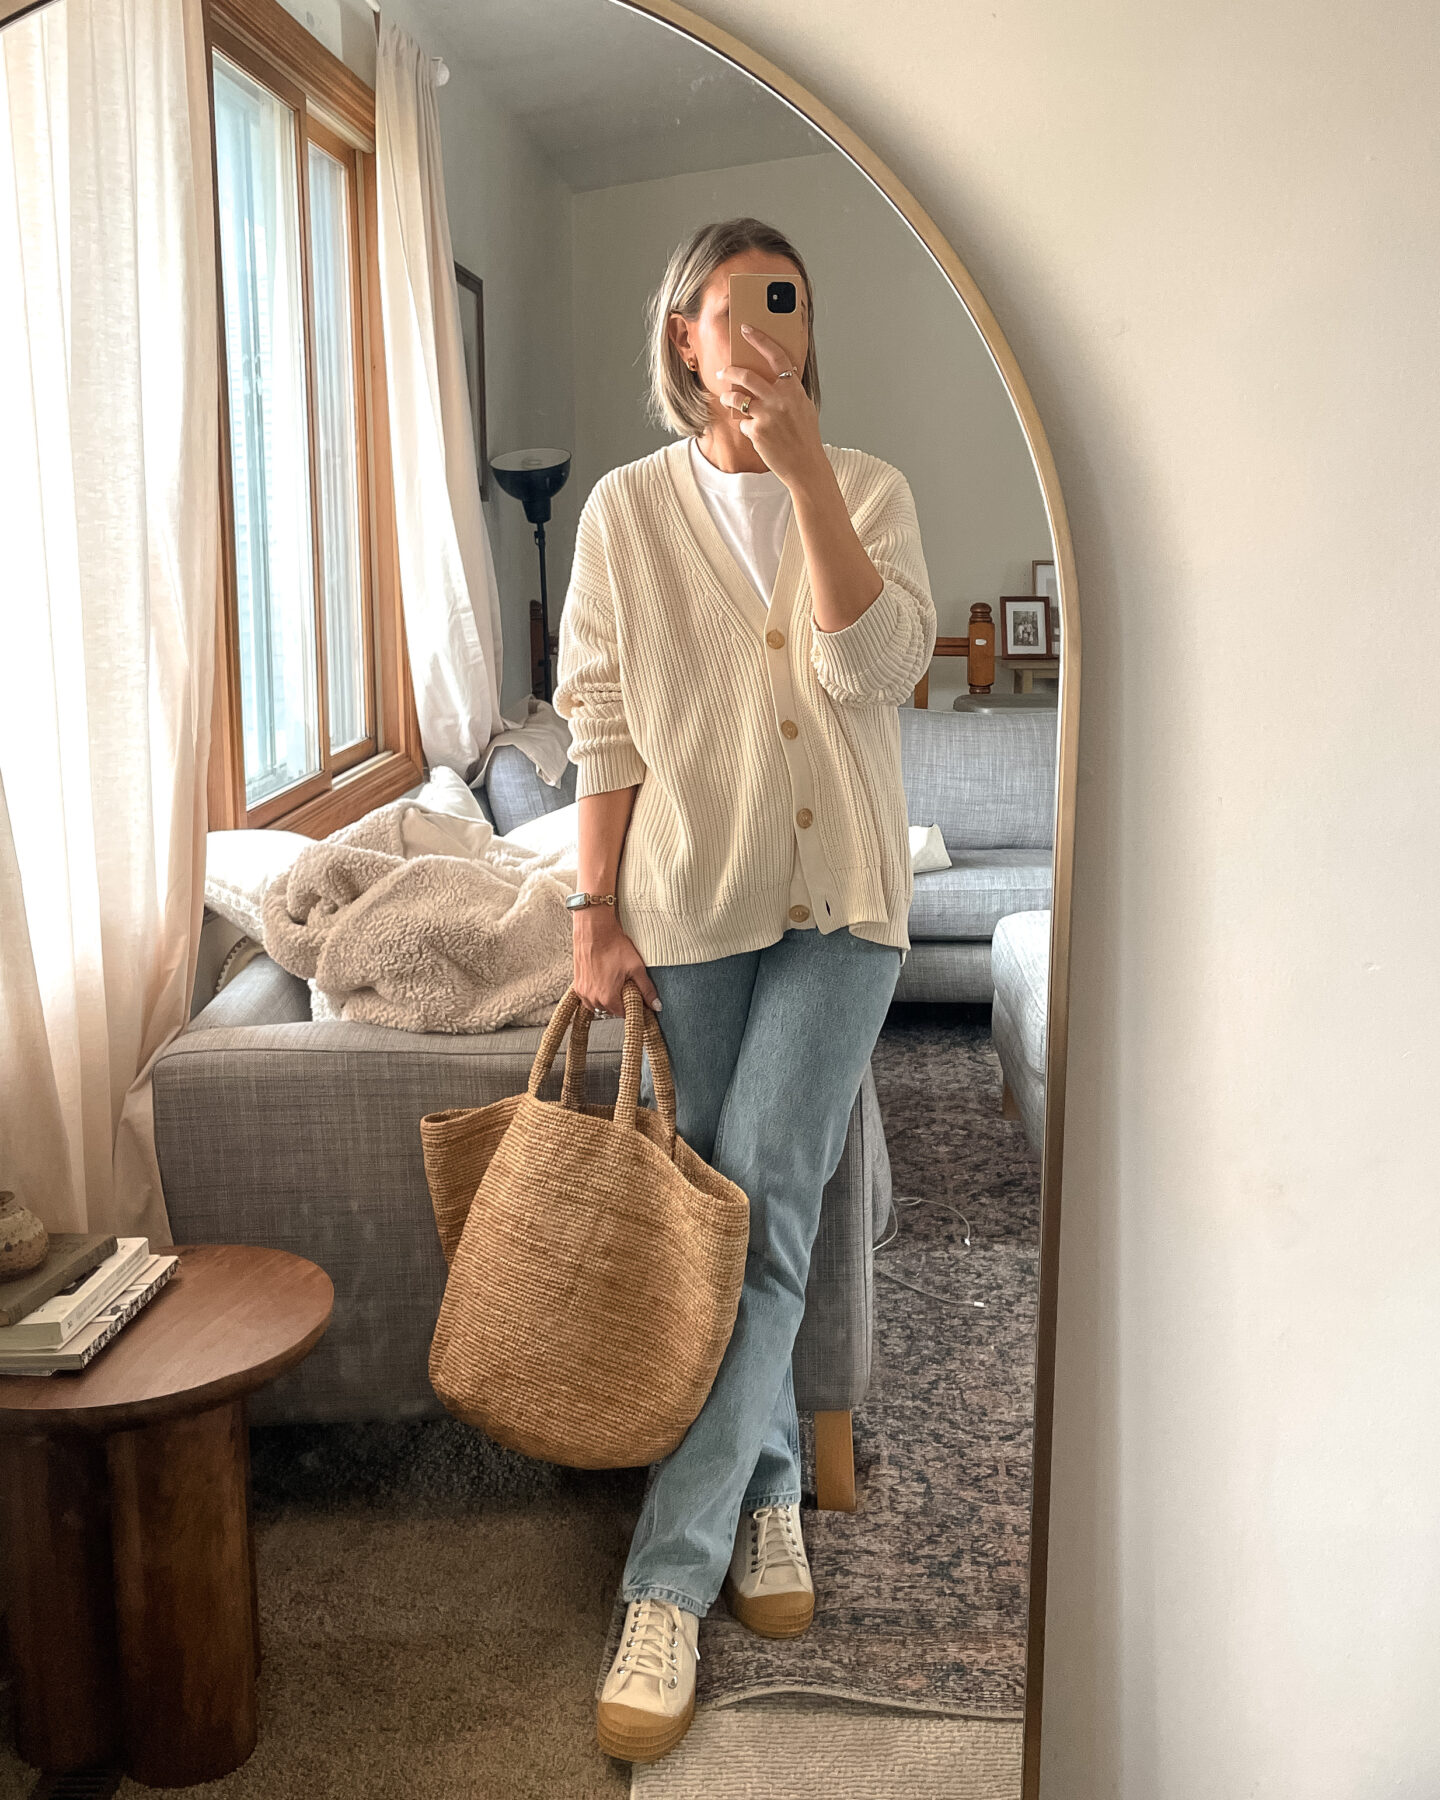 Karin Emily shares a mirror selfie in a jenni kayne cotton cardigan, agolde lana jeans, canvas sneakers and straw bag